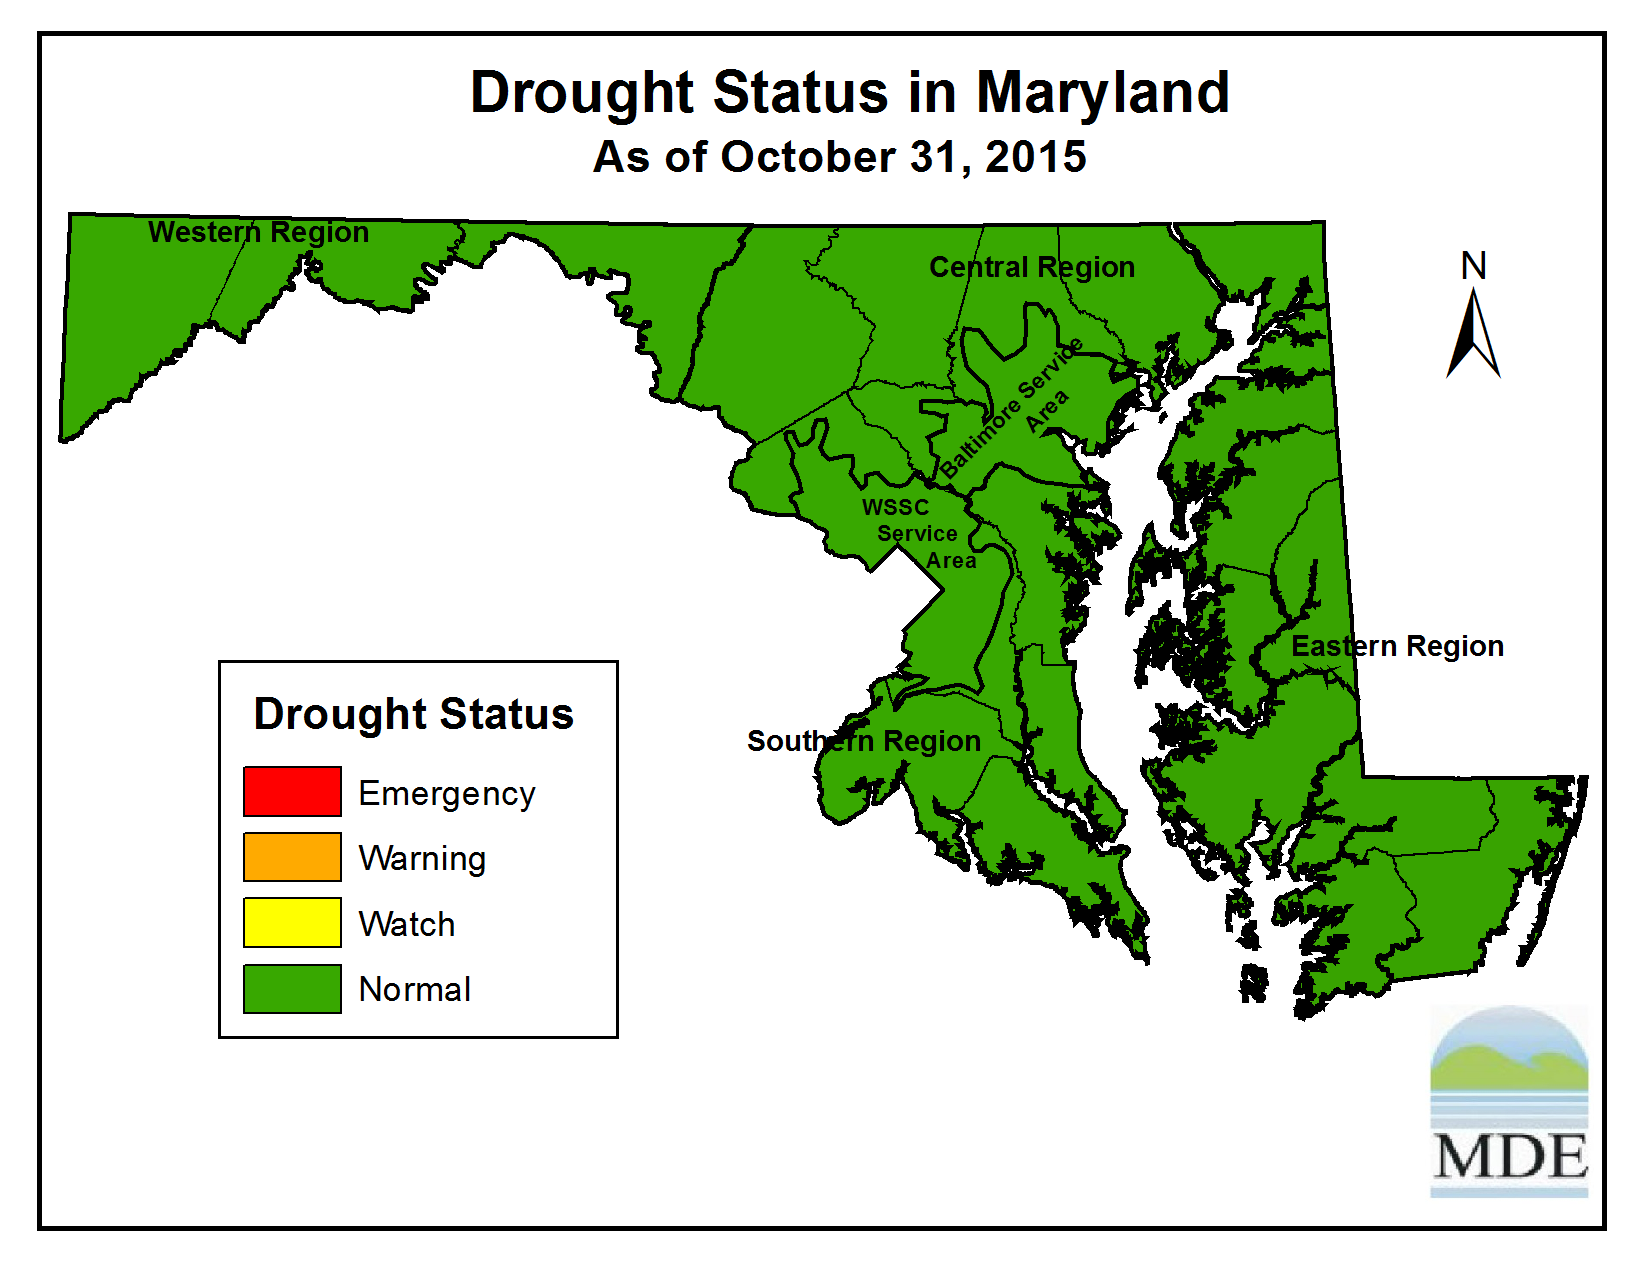 Drought Status as of October 31, 2015